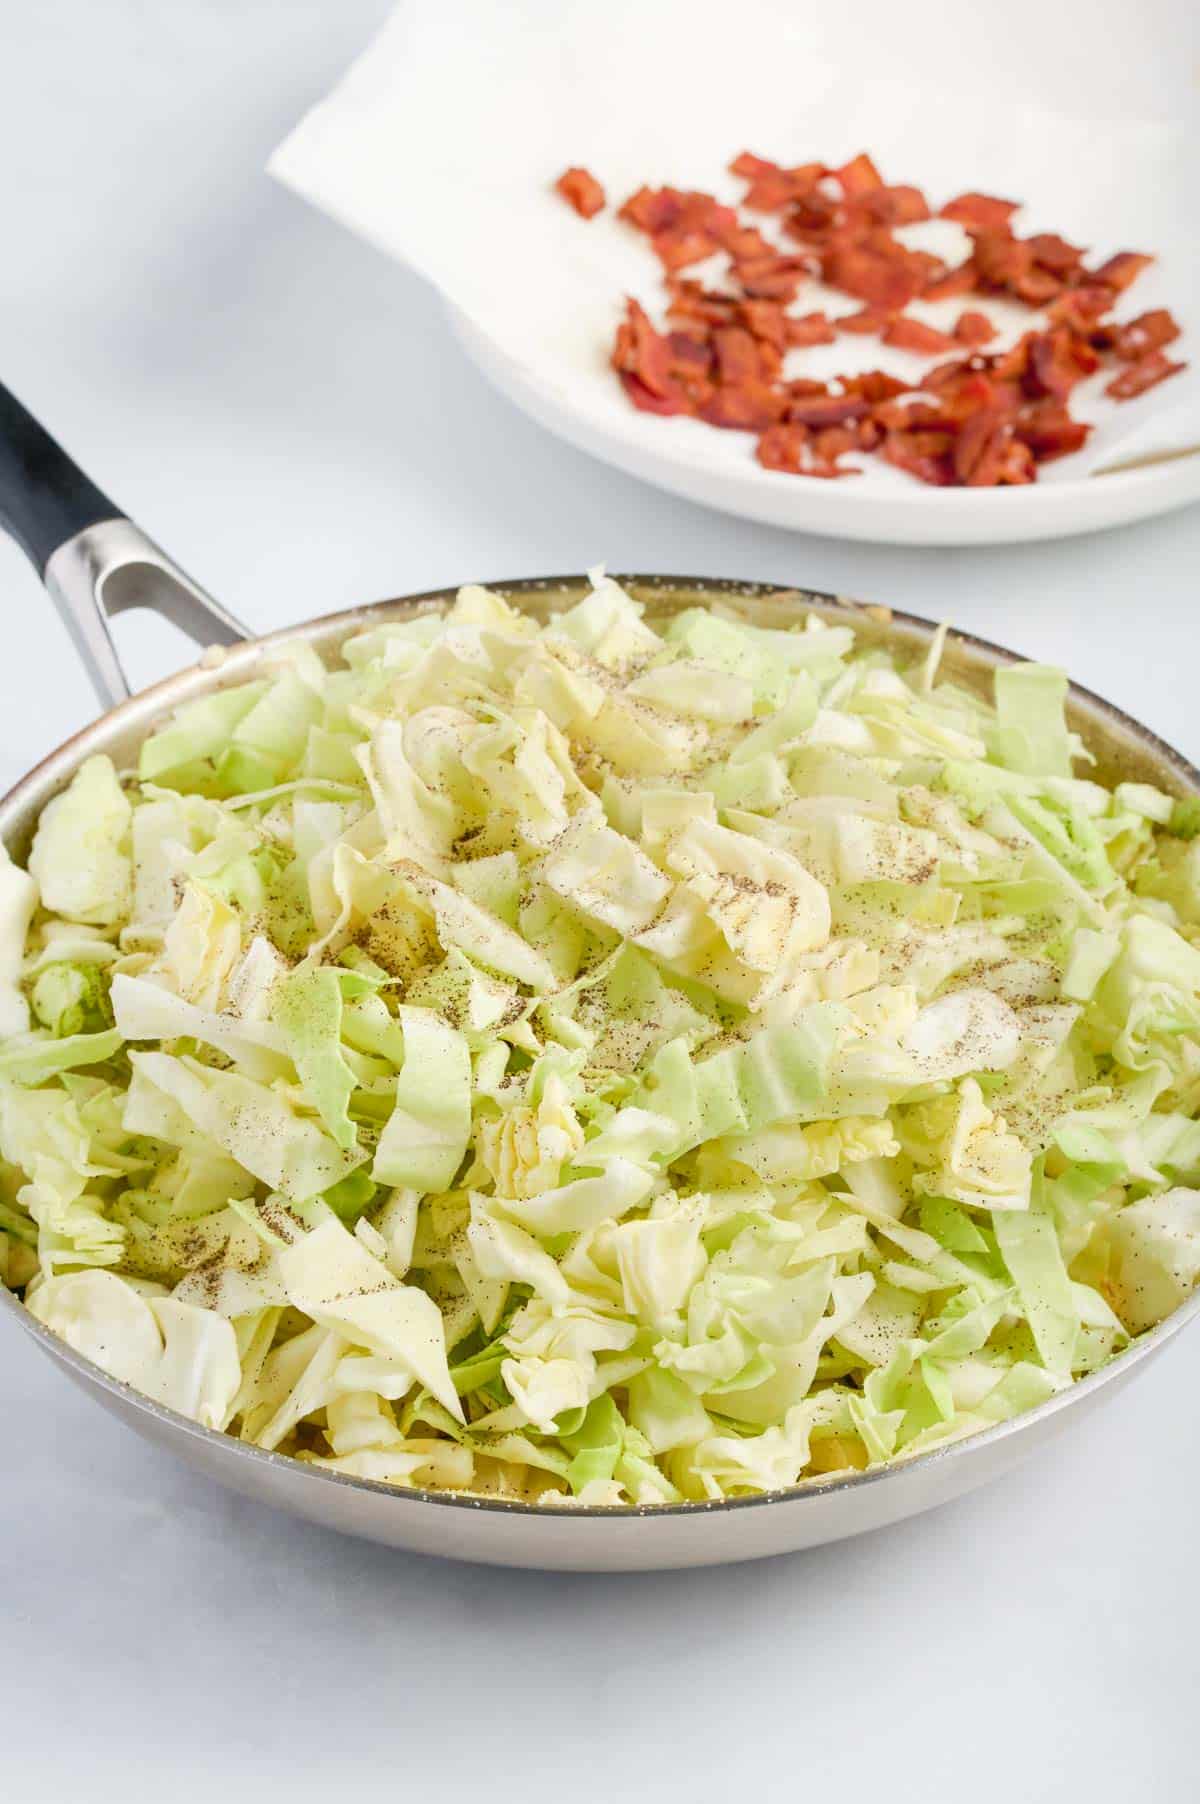 The second half of the cabbage is added to the skillet.